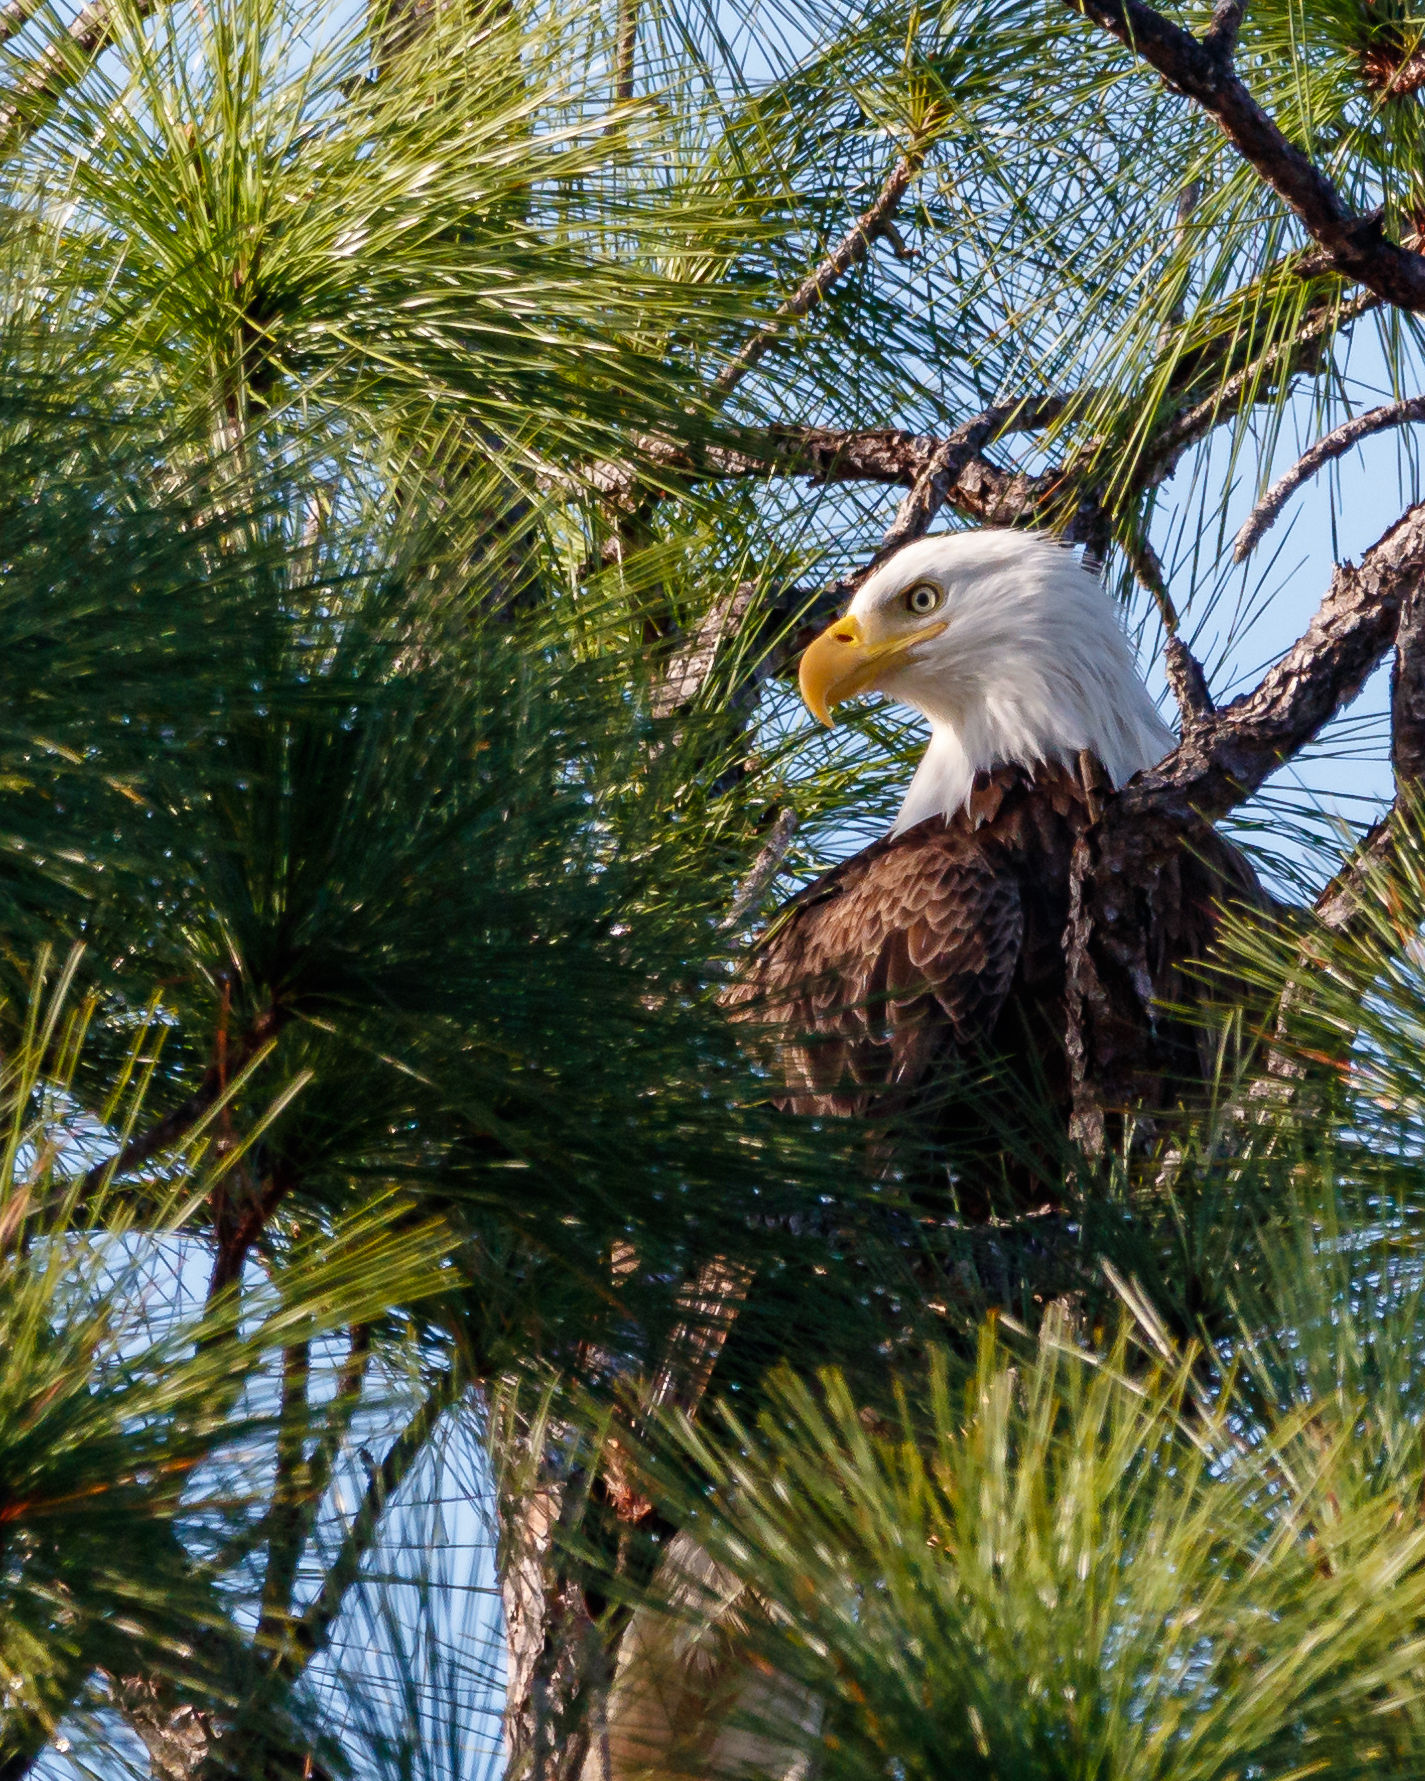 A bald eagle perches in a pine tree at Estero Bay Preserve State Park. Photo by Nate Arnold.